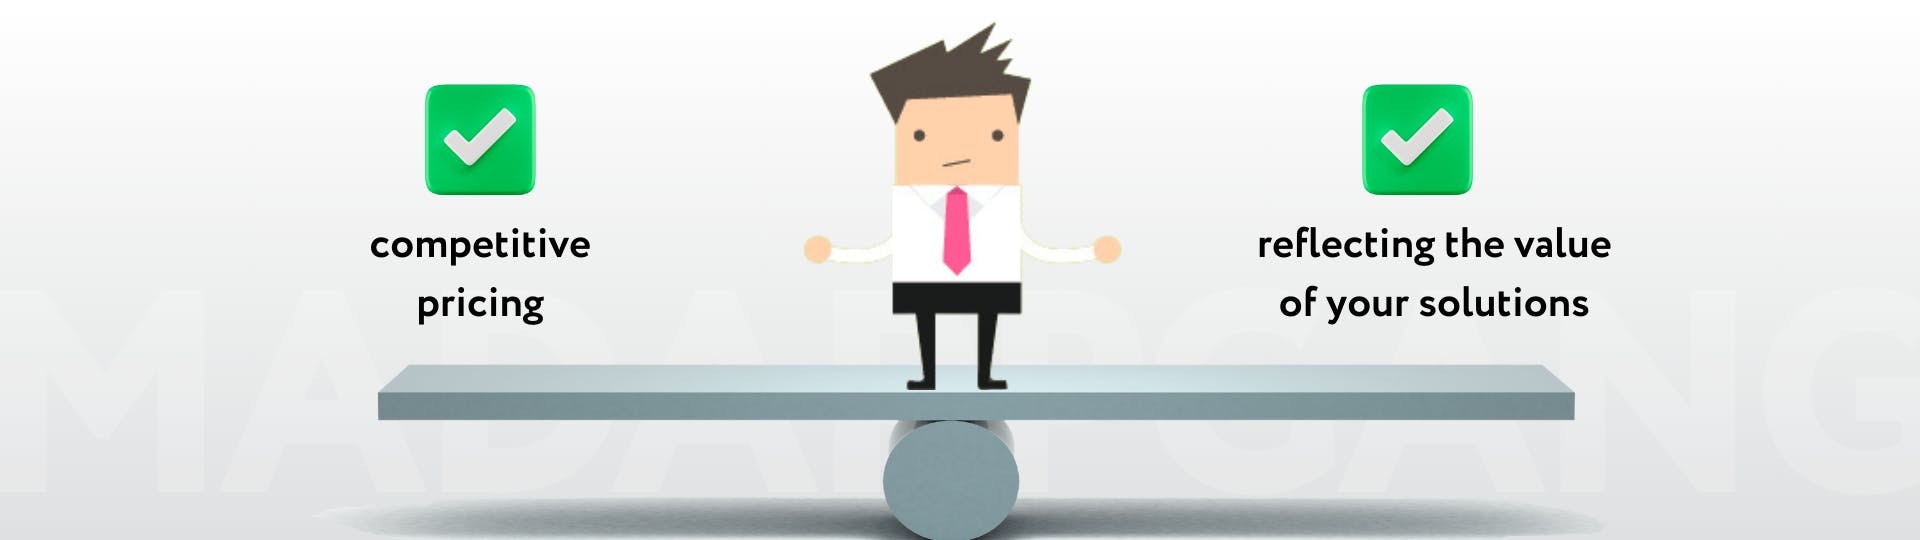 A cartoon figure with arms outstretched stands in the center of a balancing platform, on one end of which is written "competitive pricing" and on the other "reflecting the value of your solutions"